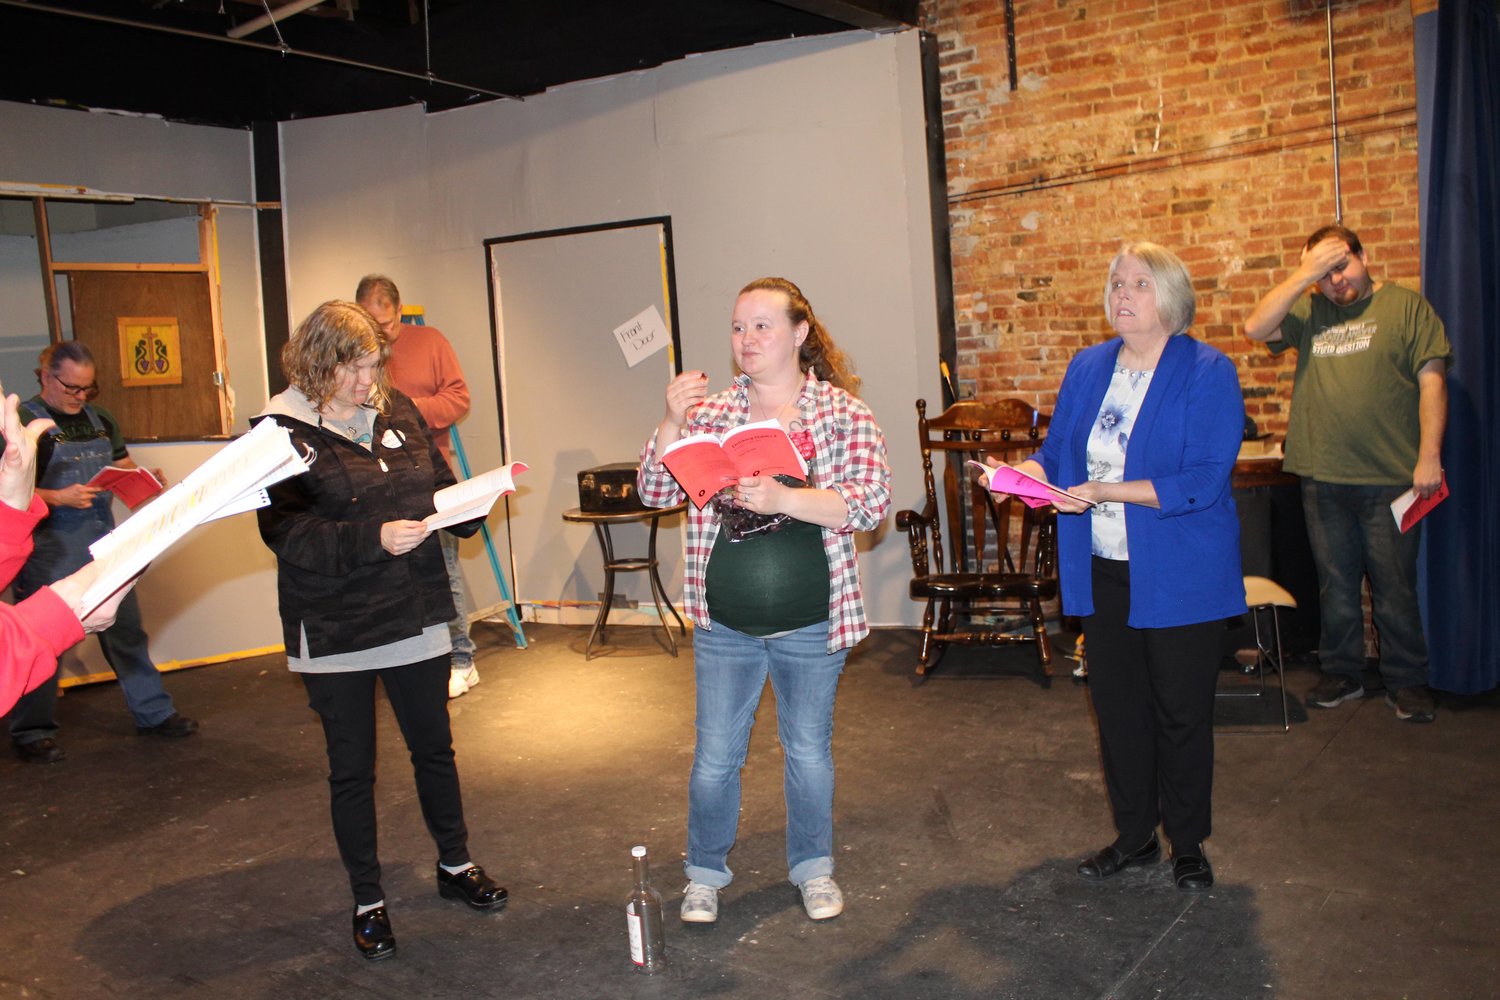 Actors in an early rehearsal for the February Show.  Pictured left to right: (Back row) Todd Gorham, Jim French, James Salisbury; (Front row) Char Abel, Jennifer Pranger & Karen Schumaker.